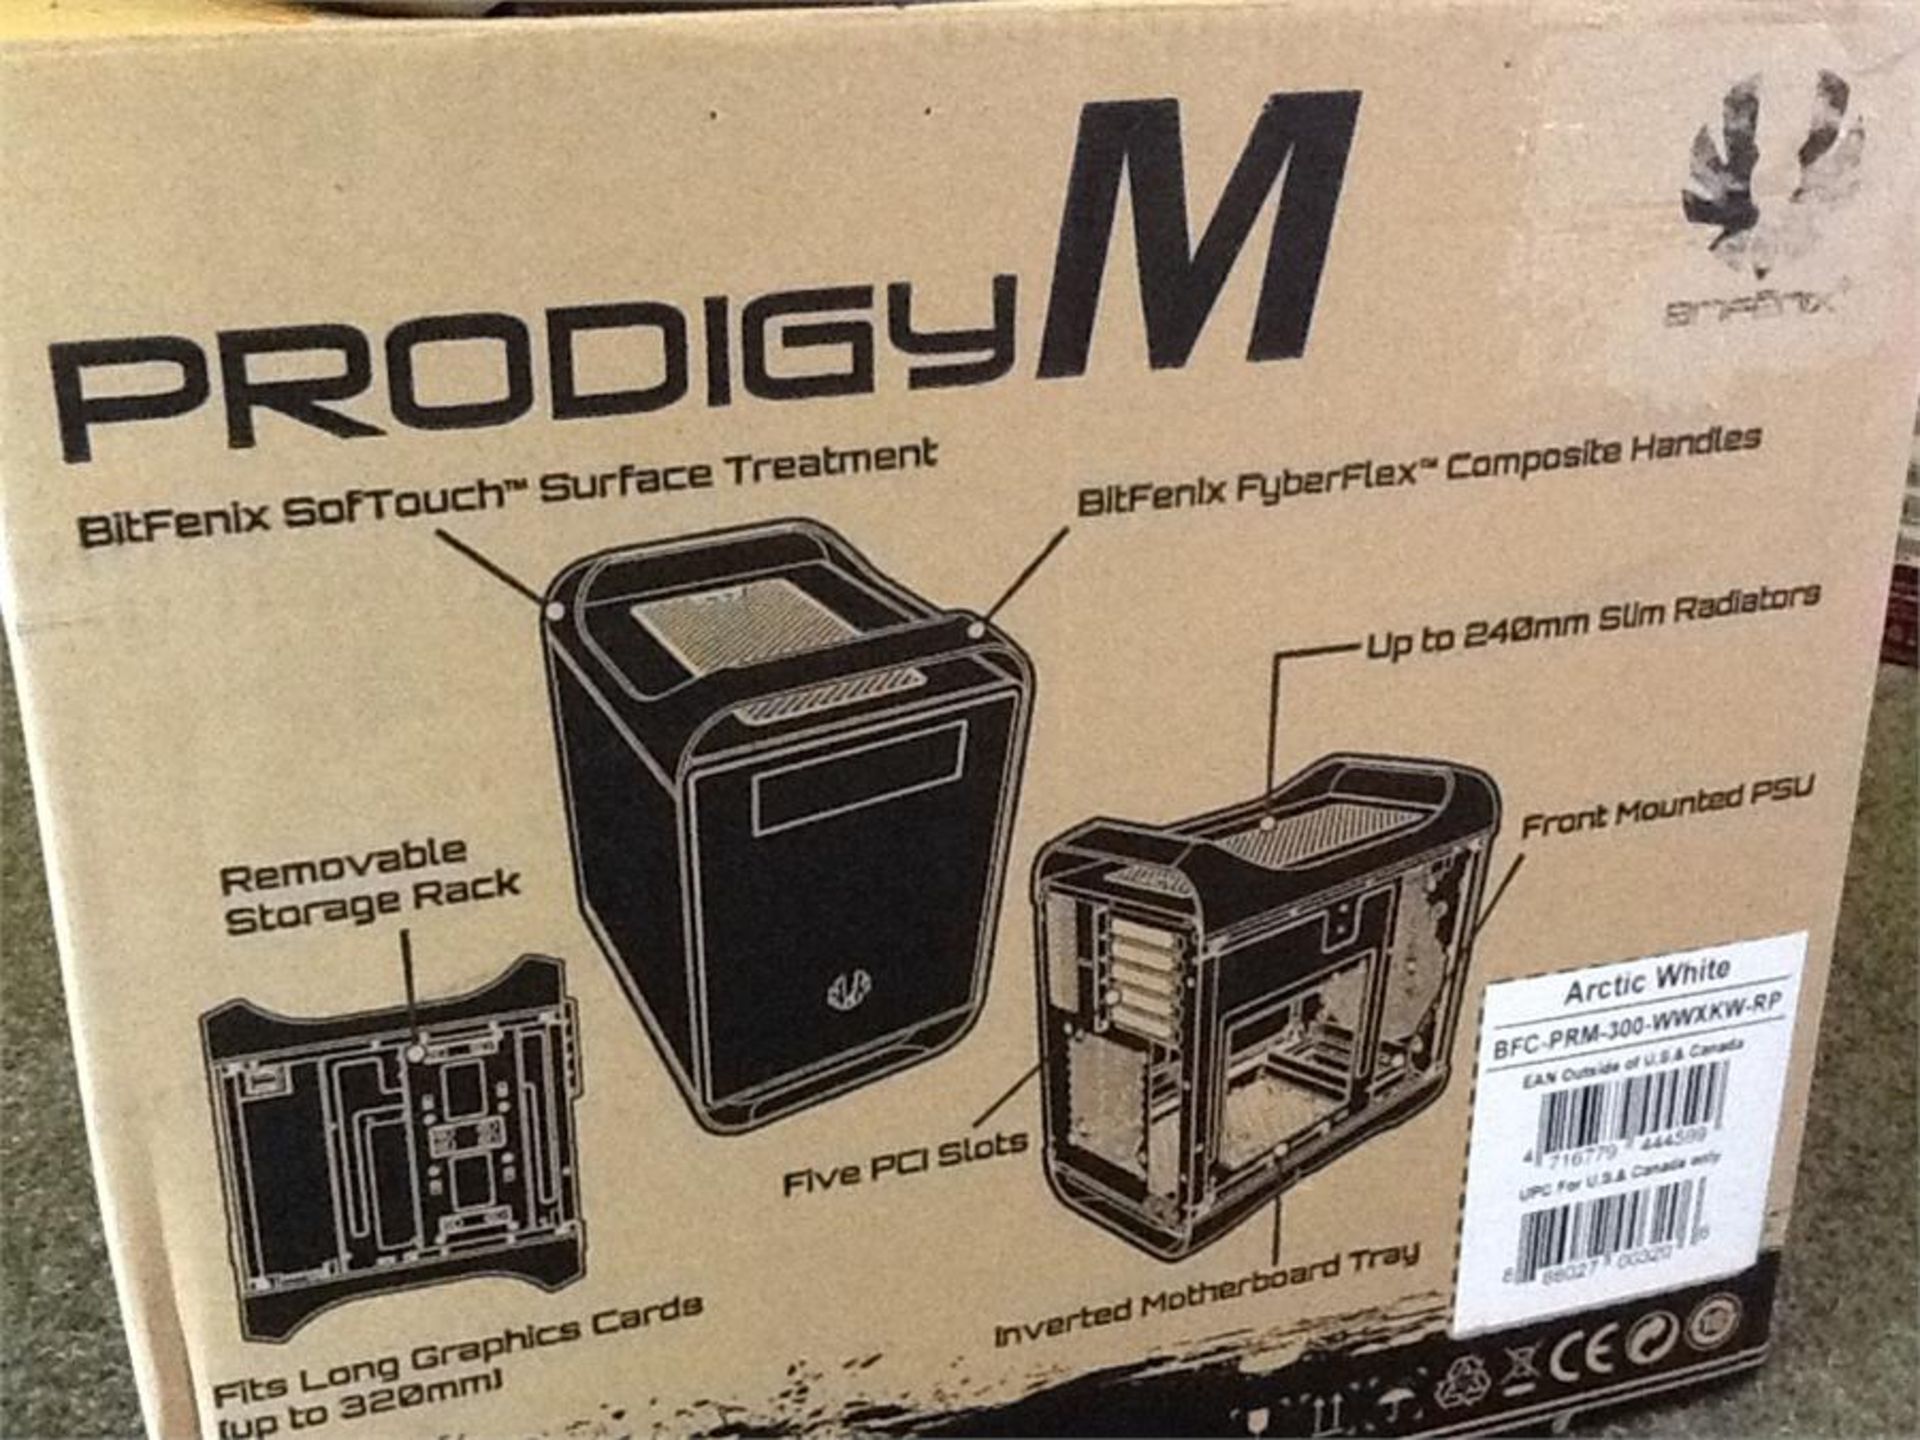 Prodigy M computer case, boxed - Image 6 of 10